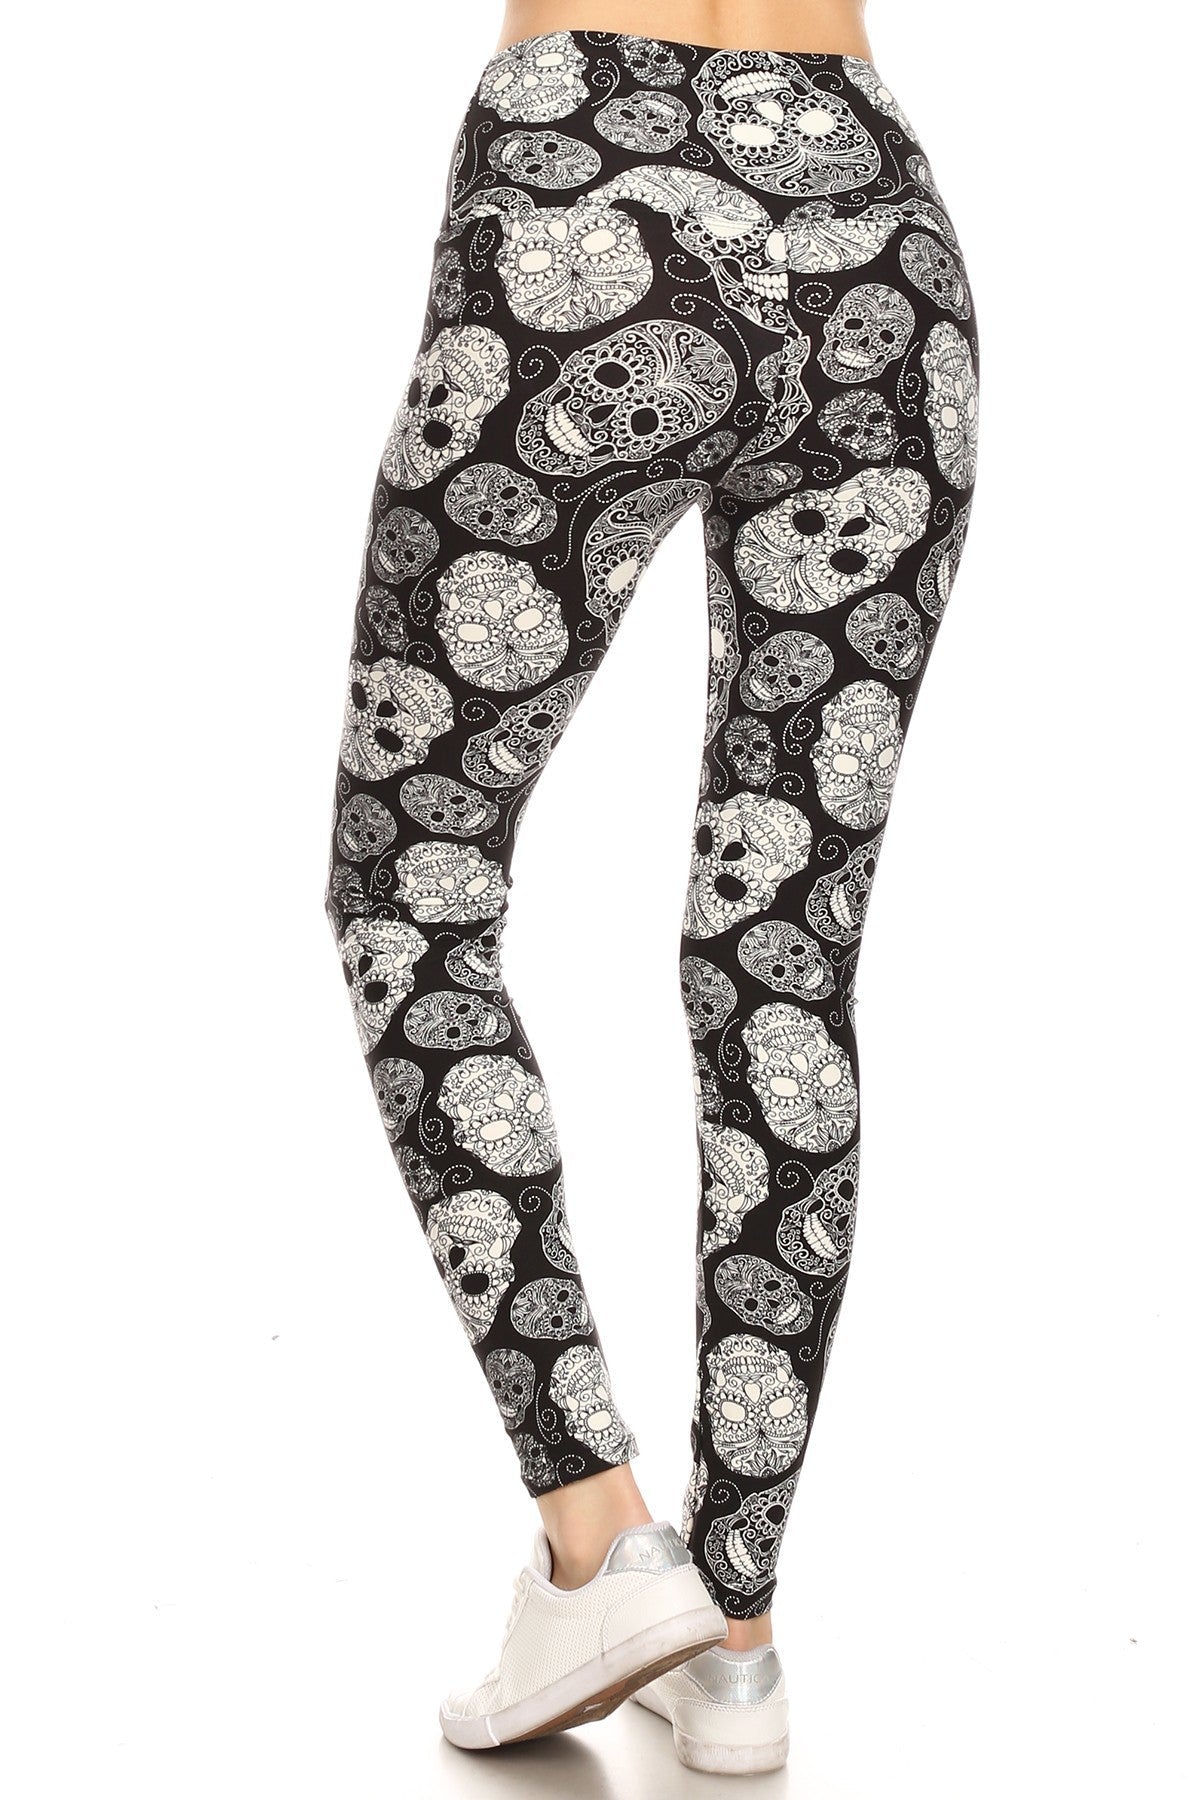 Long Yoga Style Banded Lined Skull Printed Knit Legging With High Waist Blue Zone Planet